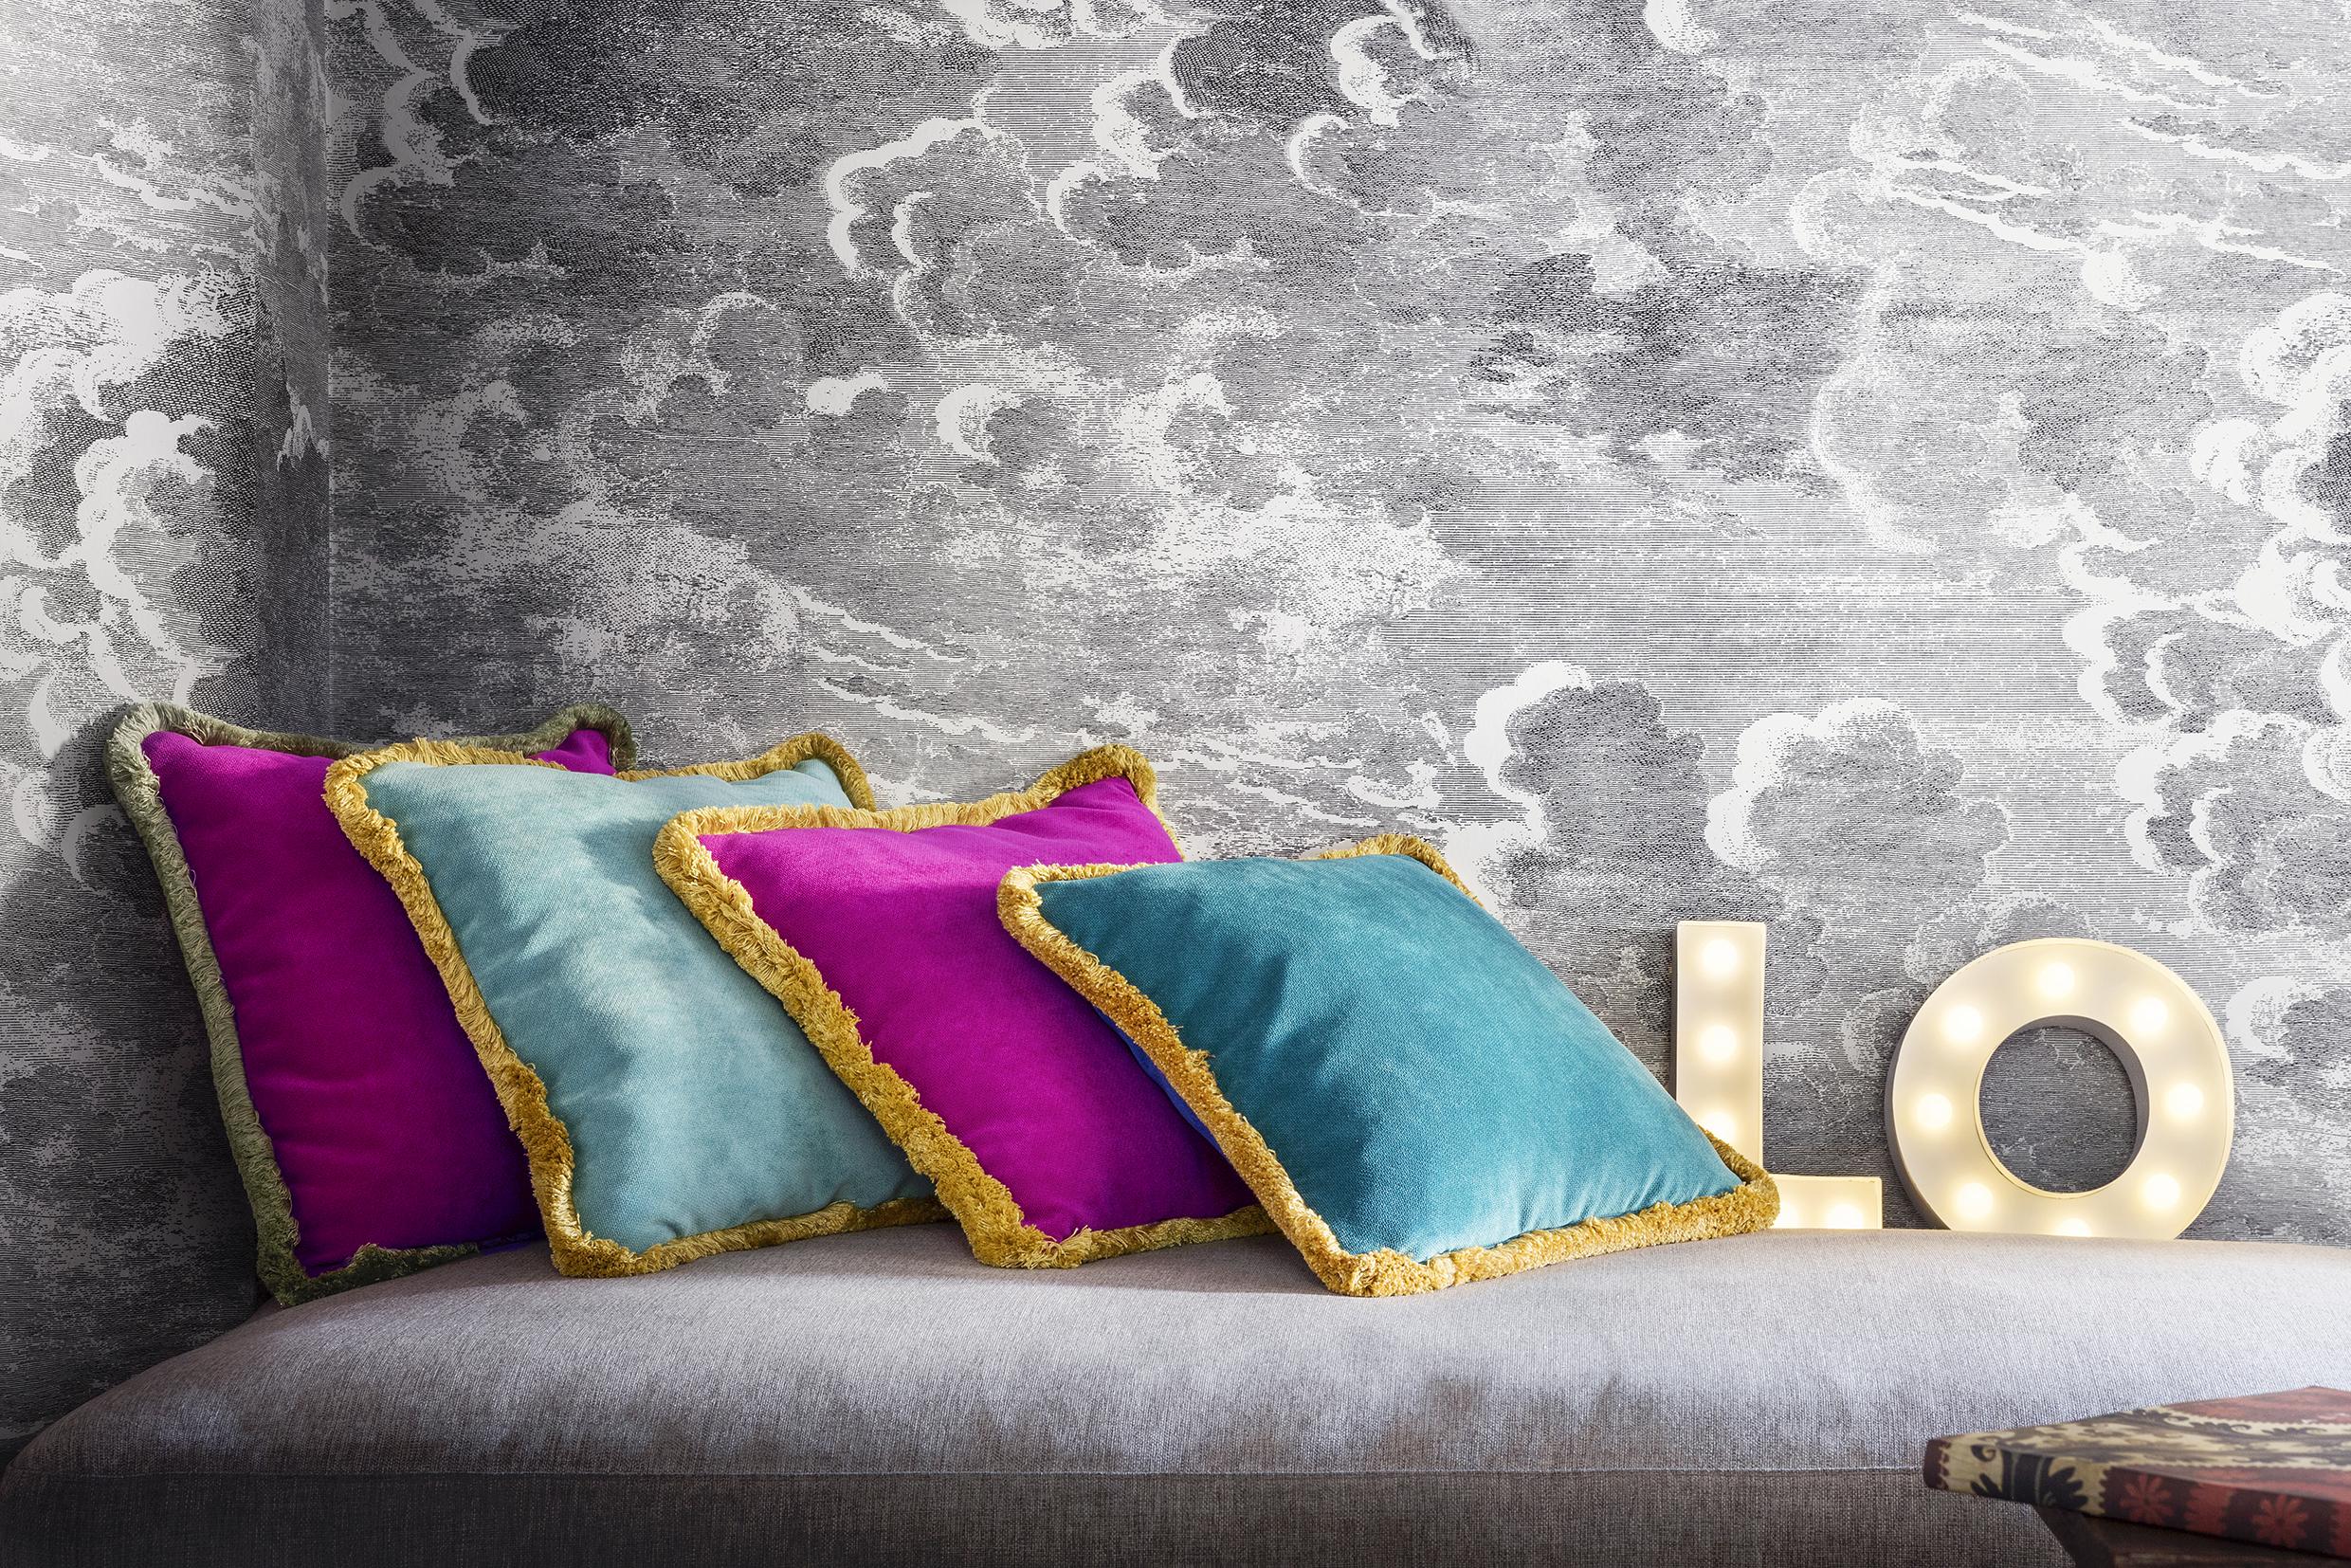 Ecletic soft velvet cushion with cotton fringes. This cushion  is a textile masterpiece for beds and sofas. This insert cushion is crafted with velvet fabrics and cotton fringes, adding a touch of sartorial elegance to a living space. Each cushion